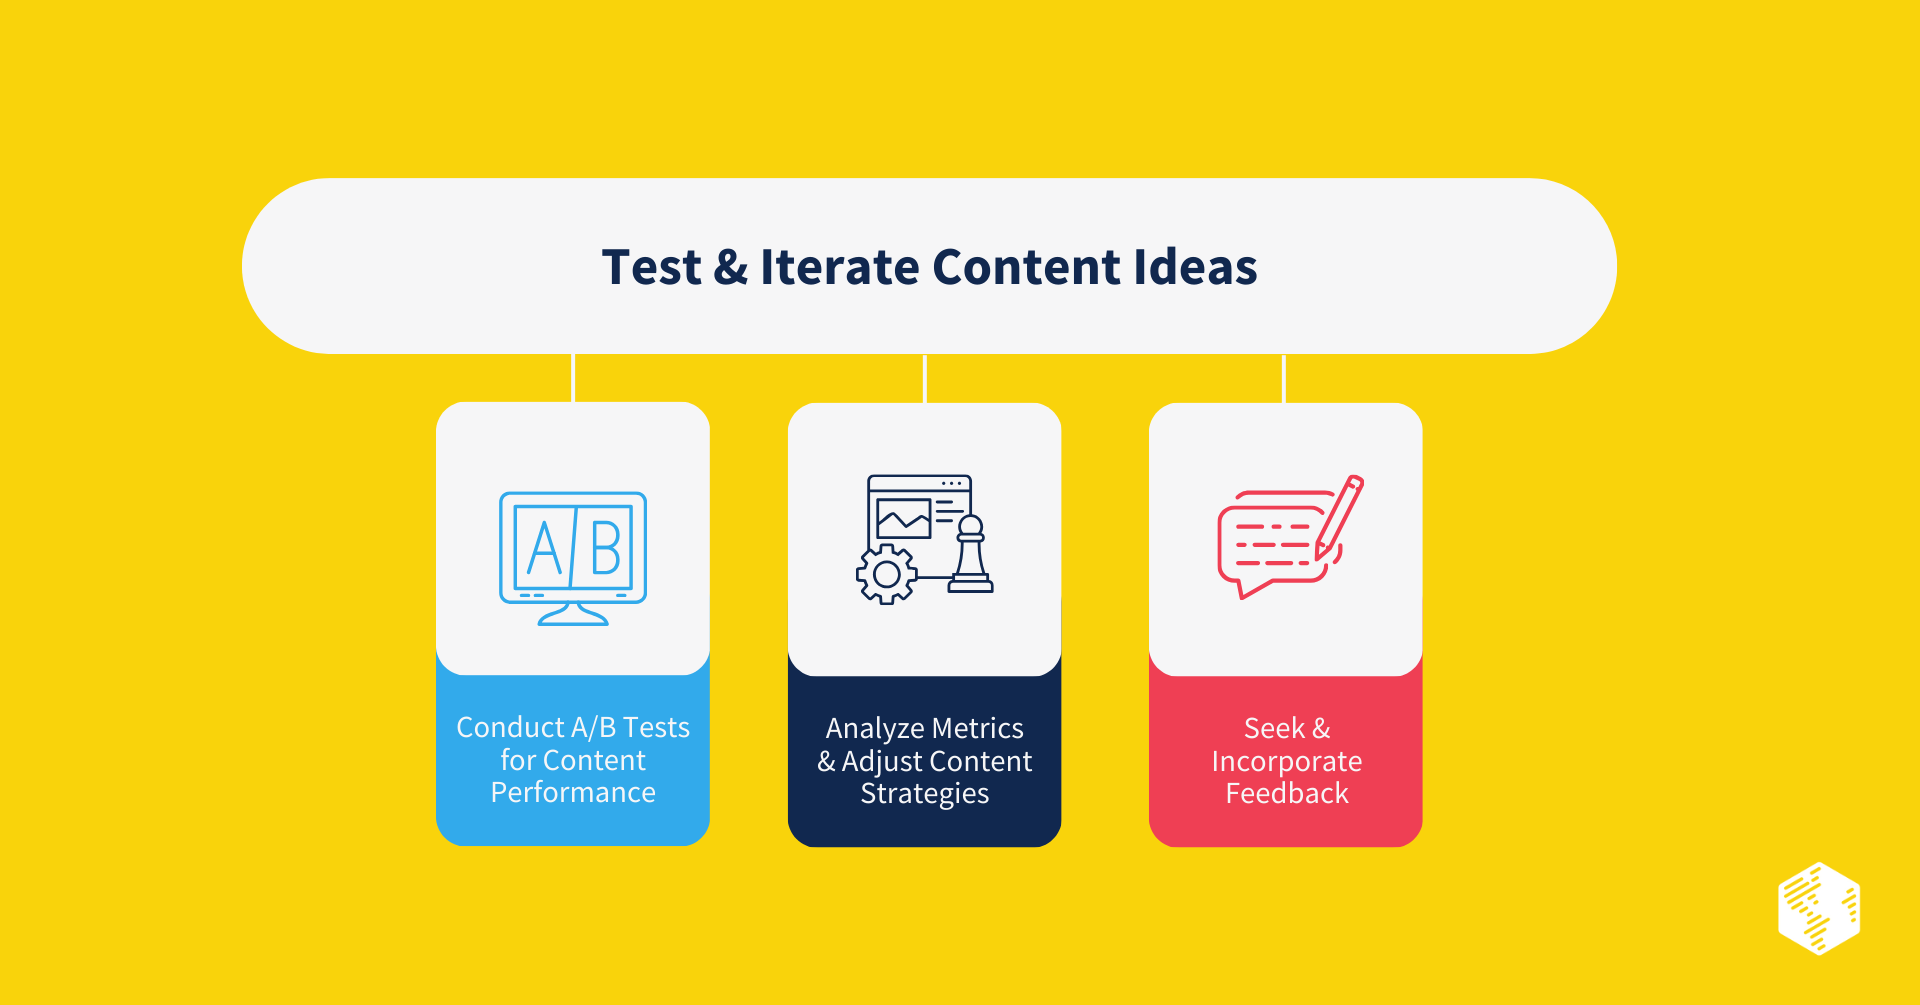 Test & Iterate Content Ideas